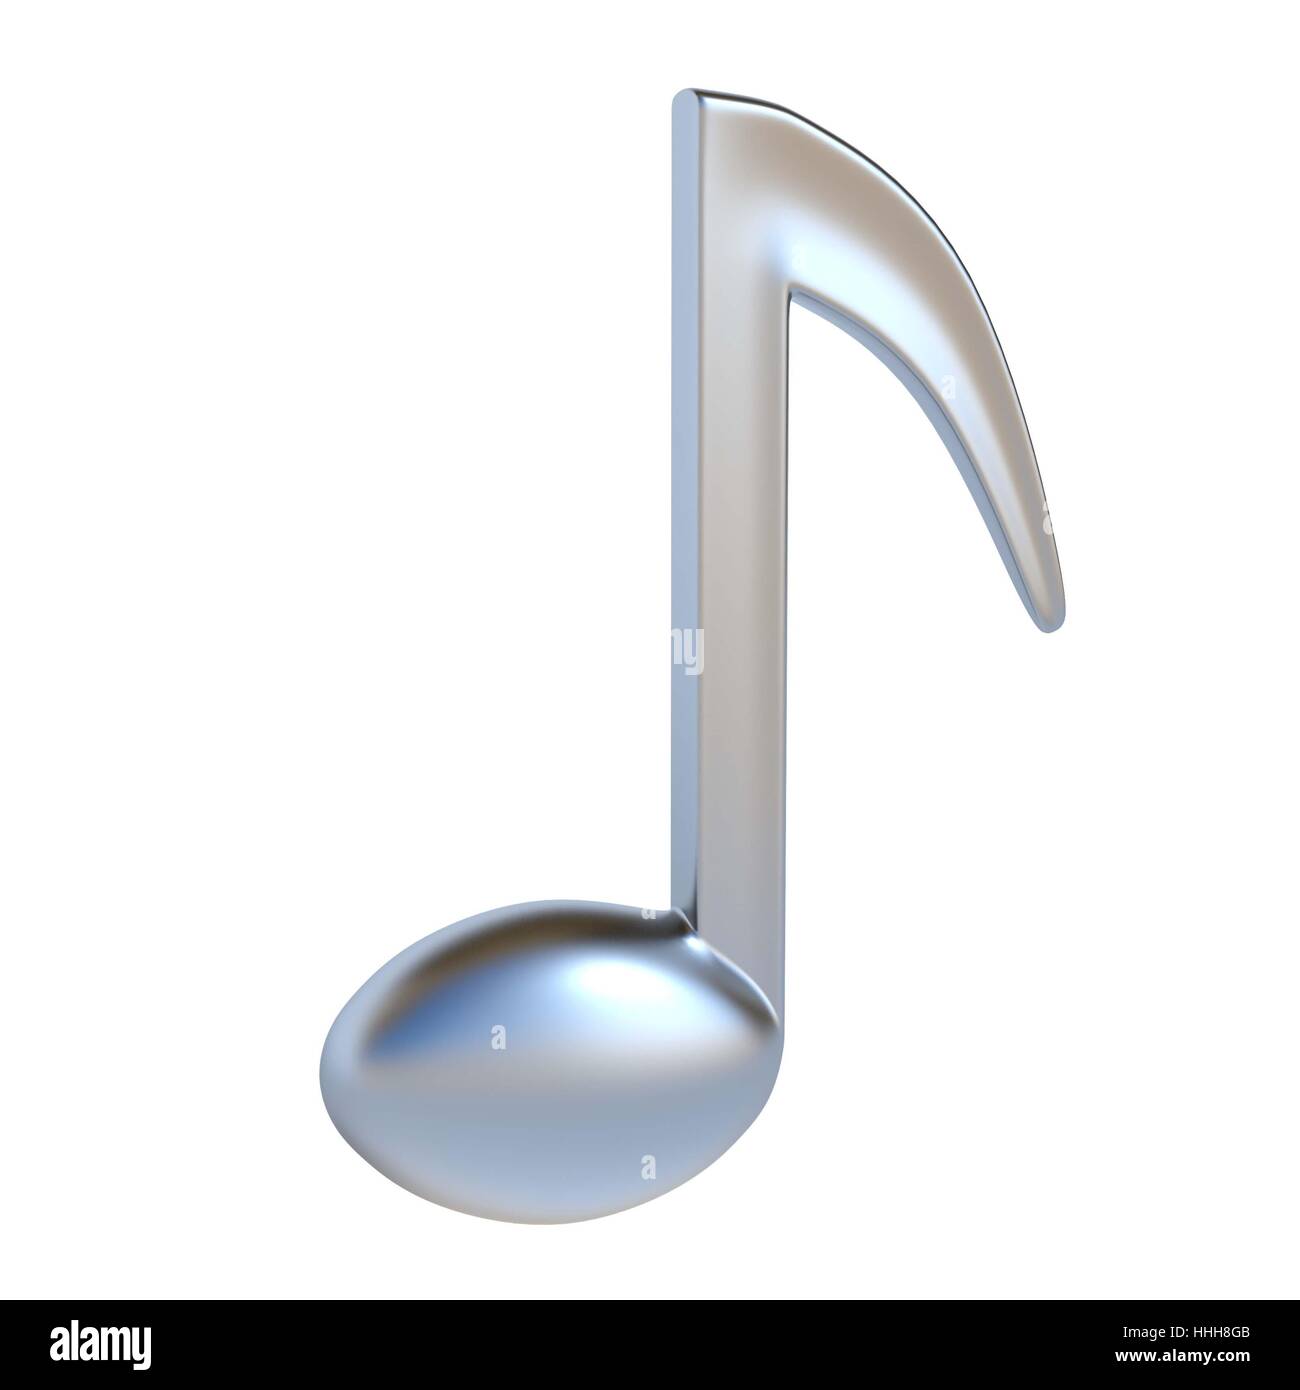 Metal music note 3D render illustration isolated on white background Stock Photo